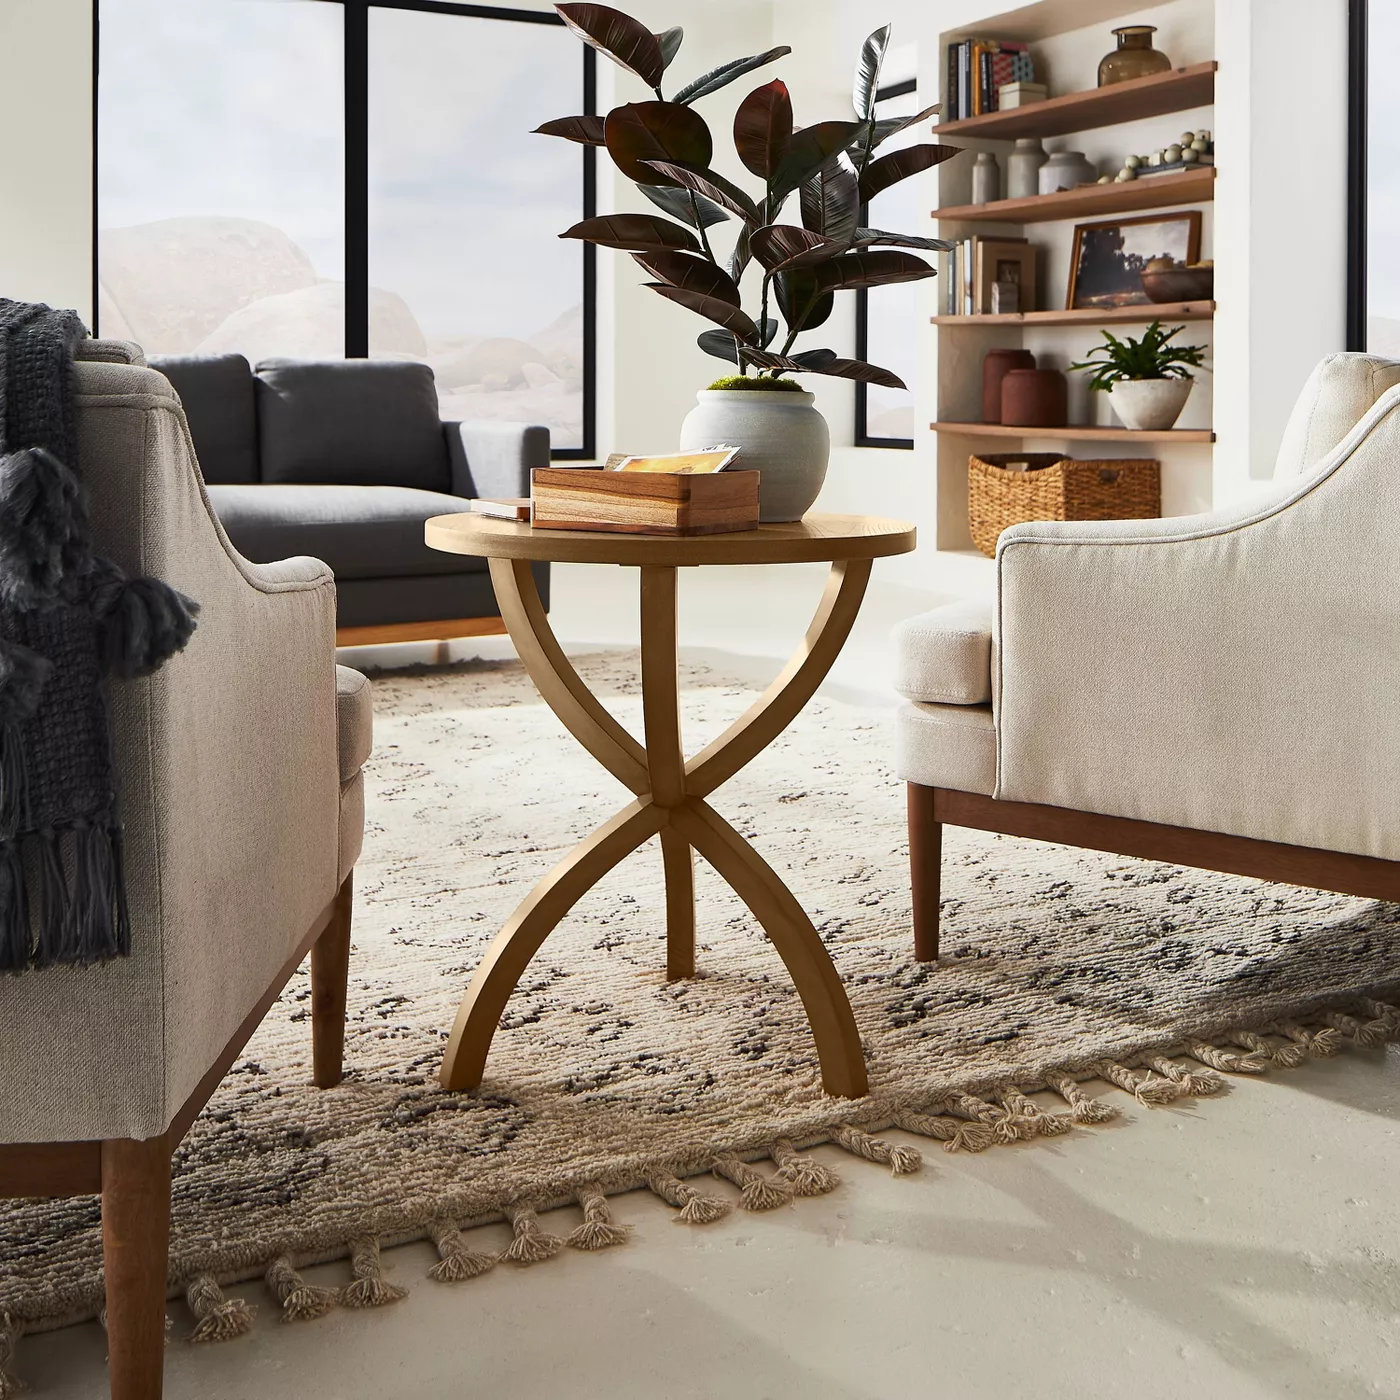 The new Studio McGee Target Fall 2021 Collection - my top picks for the living room, bedroom, kitchen, and entryway - jane at home